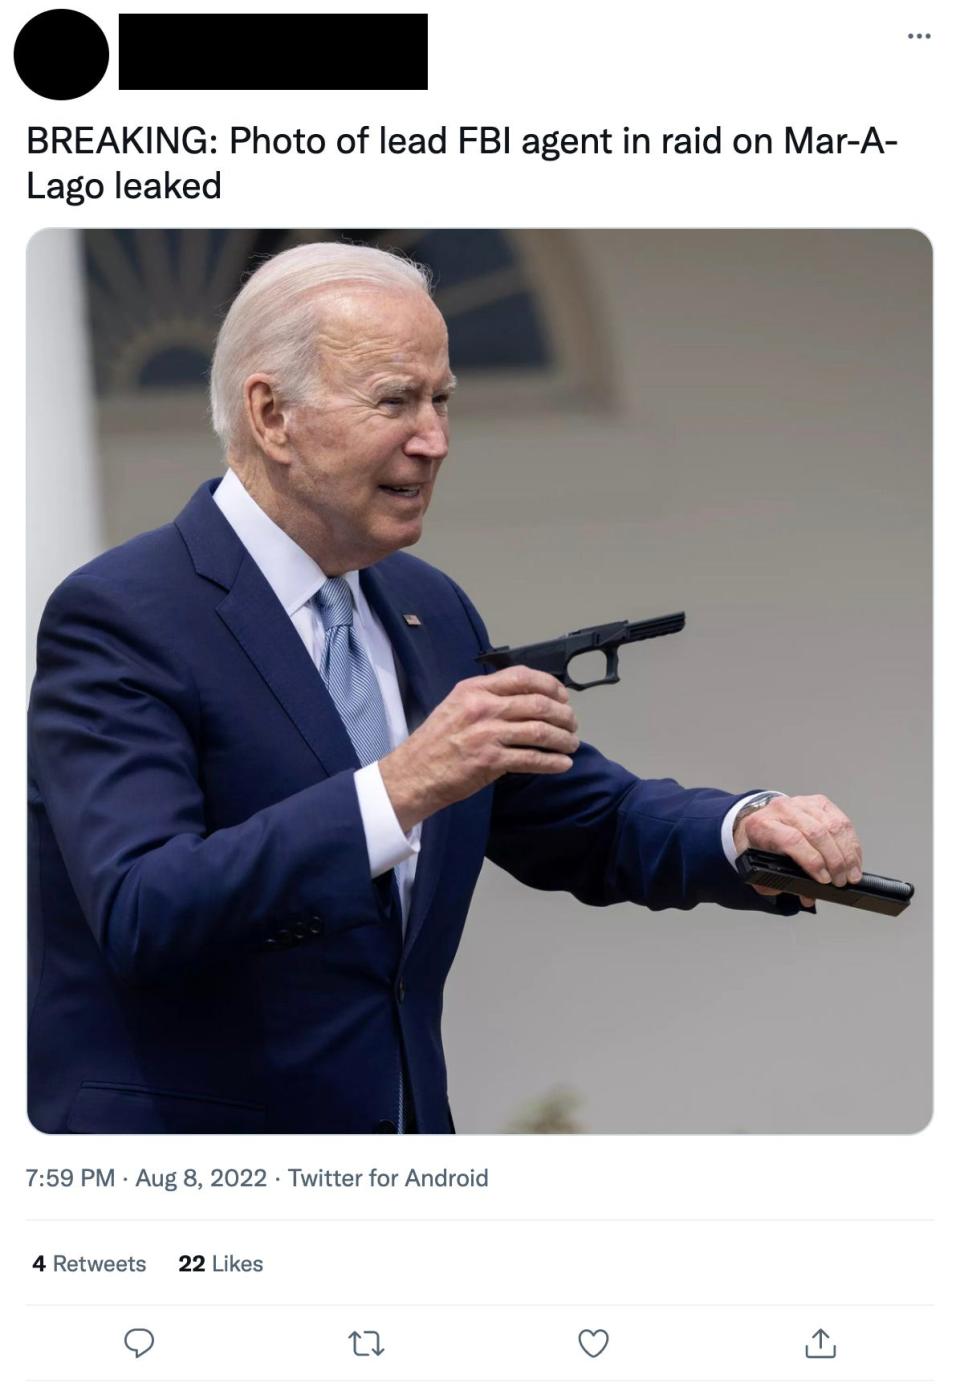 In one meme posted on Twitter on the day the FBI executed a search warrant at Donald Trump's Mar-A-Lago residence, President Joe Biden wields a small gun with text reading, "BREAKING: Photo of lead FBI agent in raid on Mar-A-Lago leaked." The false statement suggests Biden was involved in the raid.